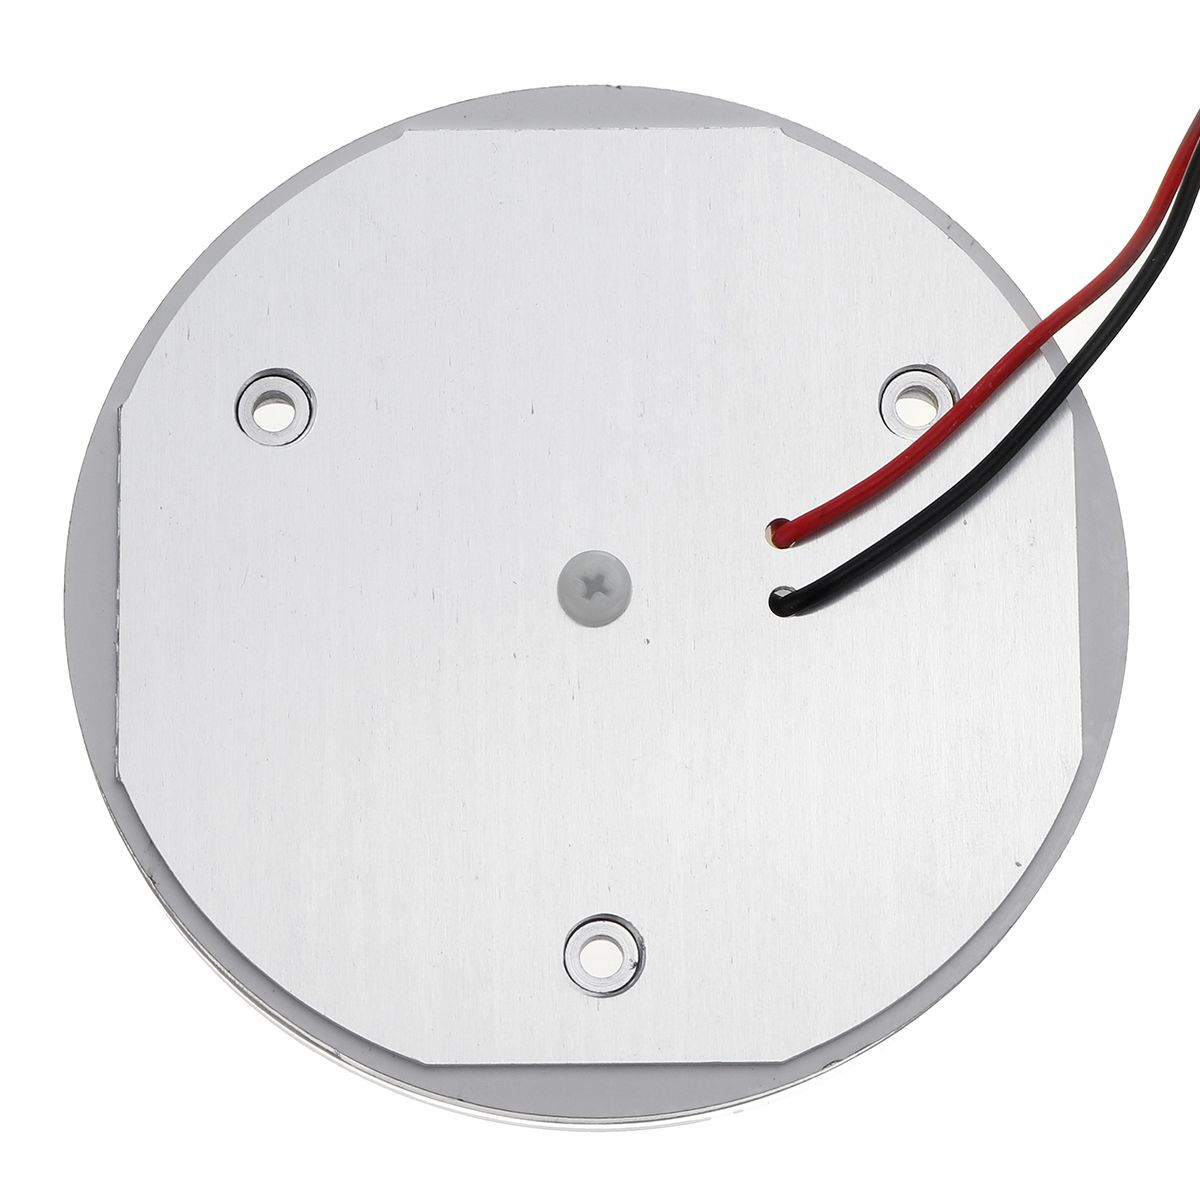 100mm-Dimmable-LED-Reading-Light-Touch-Dimmer-Switch-BlueWarm-White-Day-Night-Car-Roof-Lamp-for-Cara-1696178